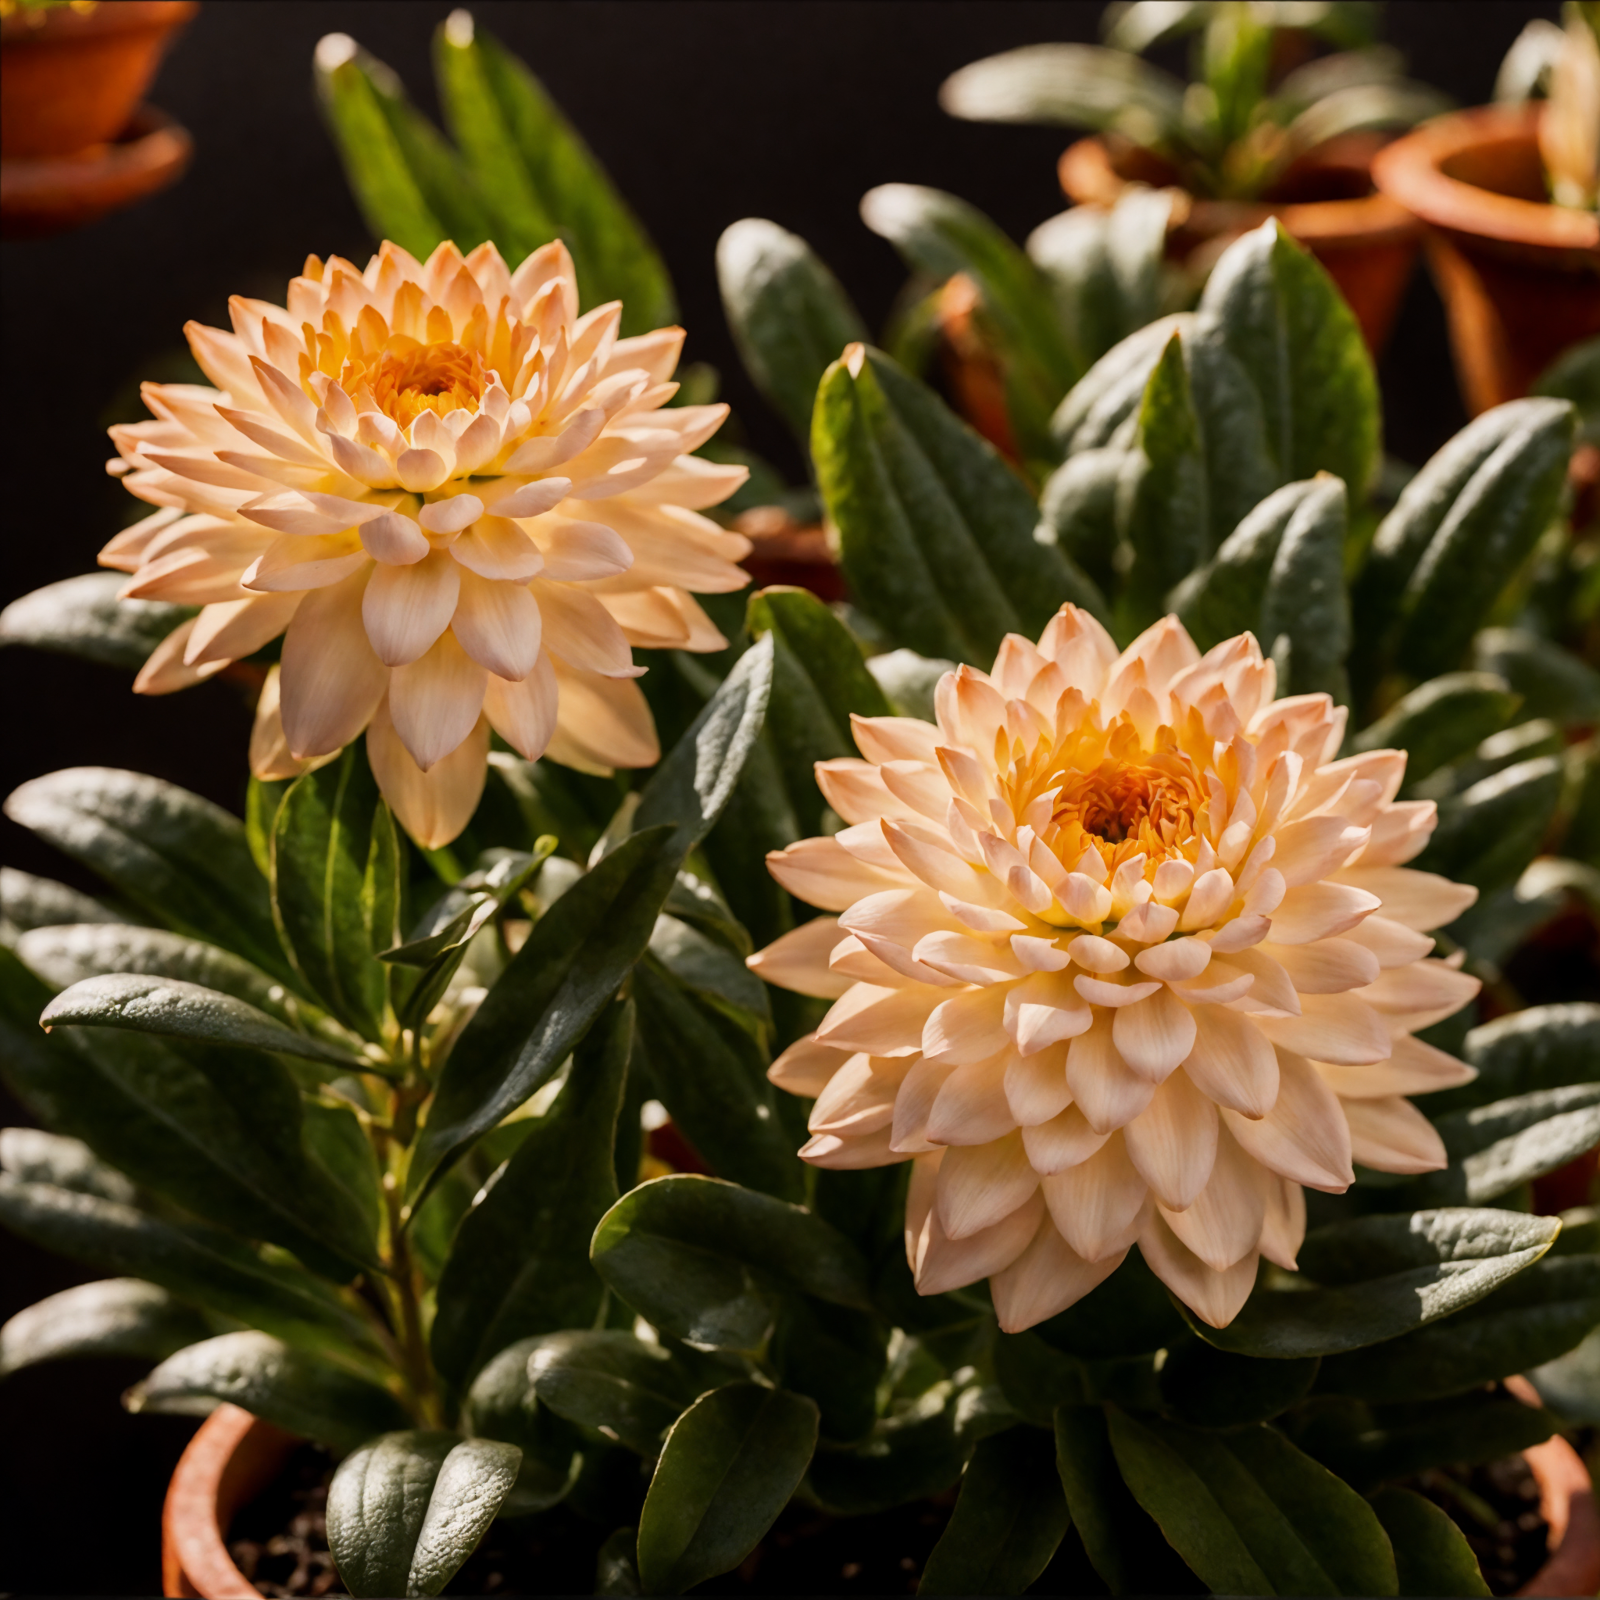 A Xerochrysum bracteatum with large white blooms, yellow centers, against a dark background indoors.